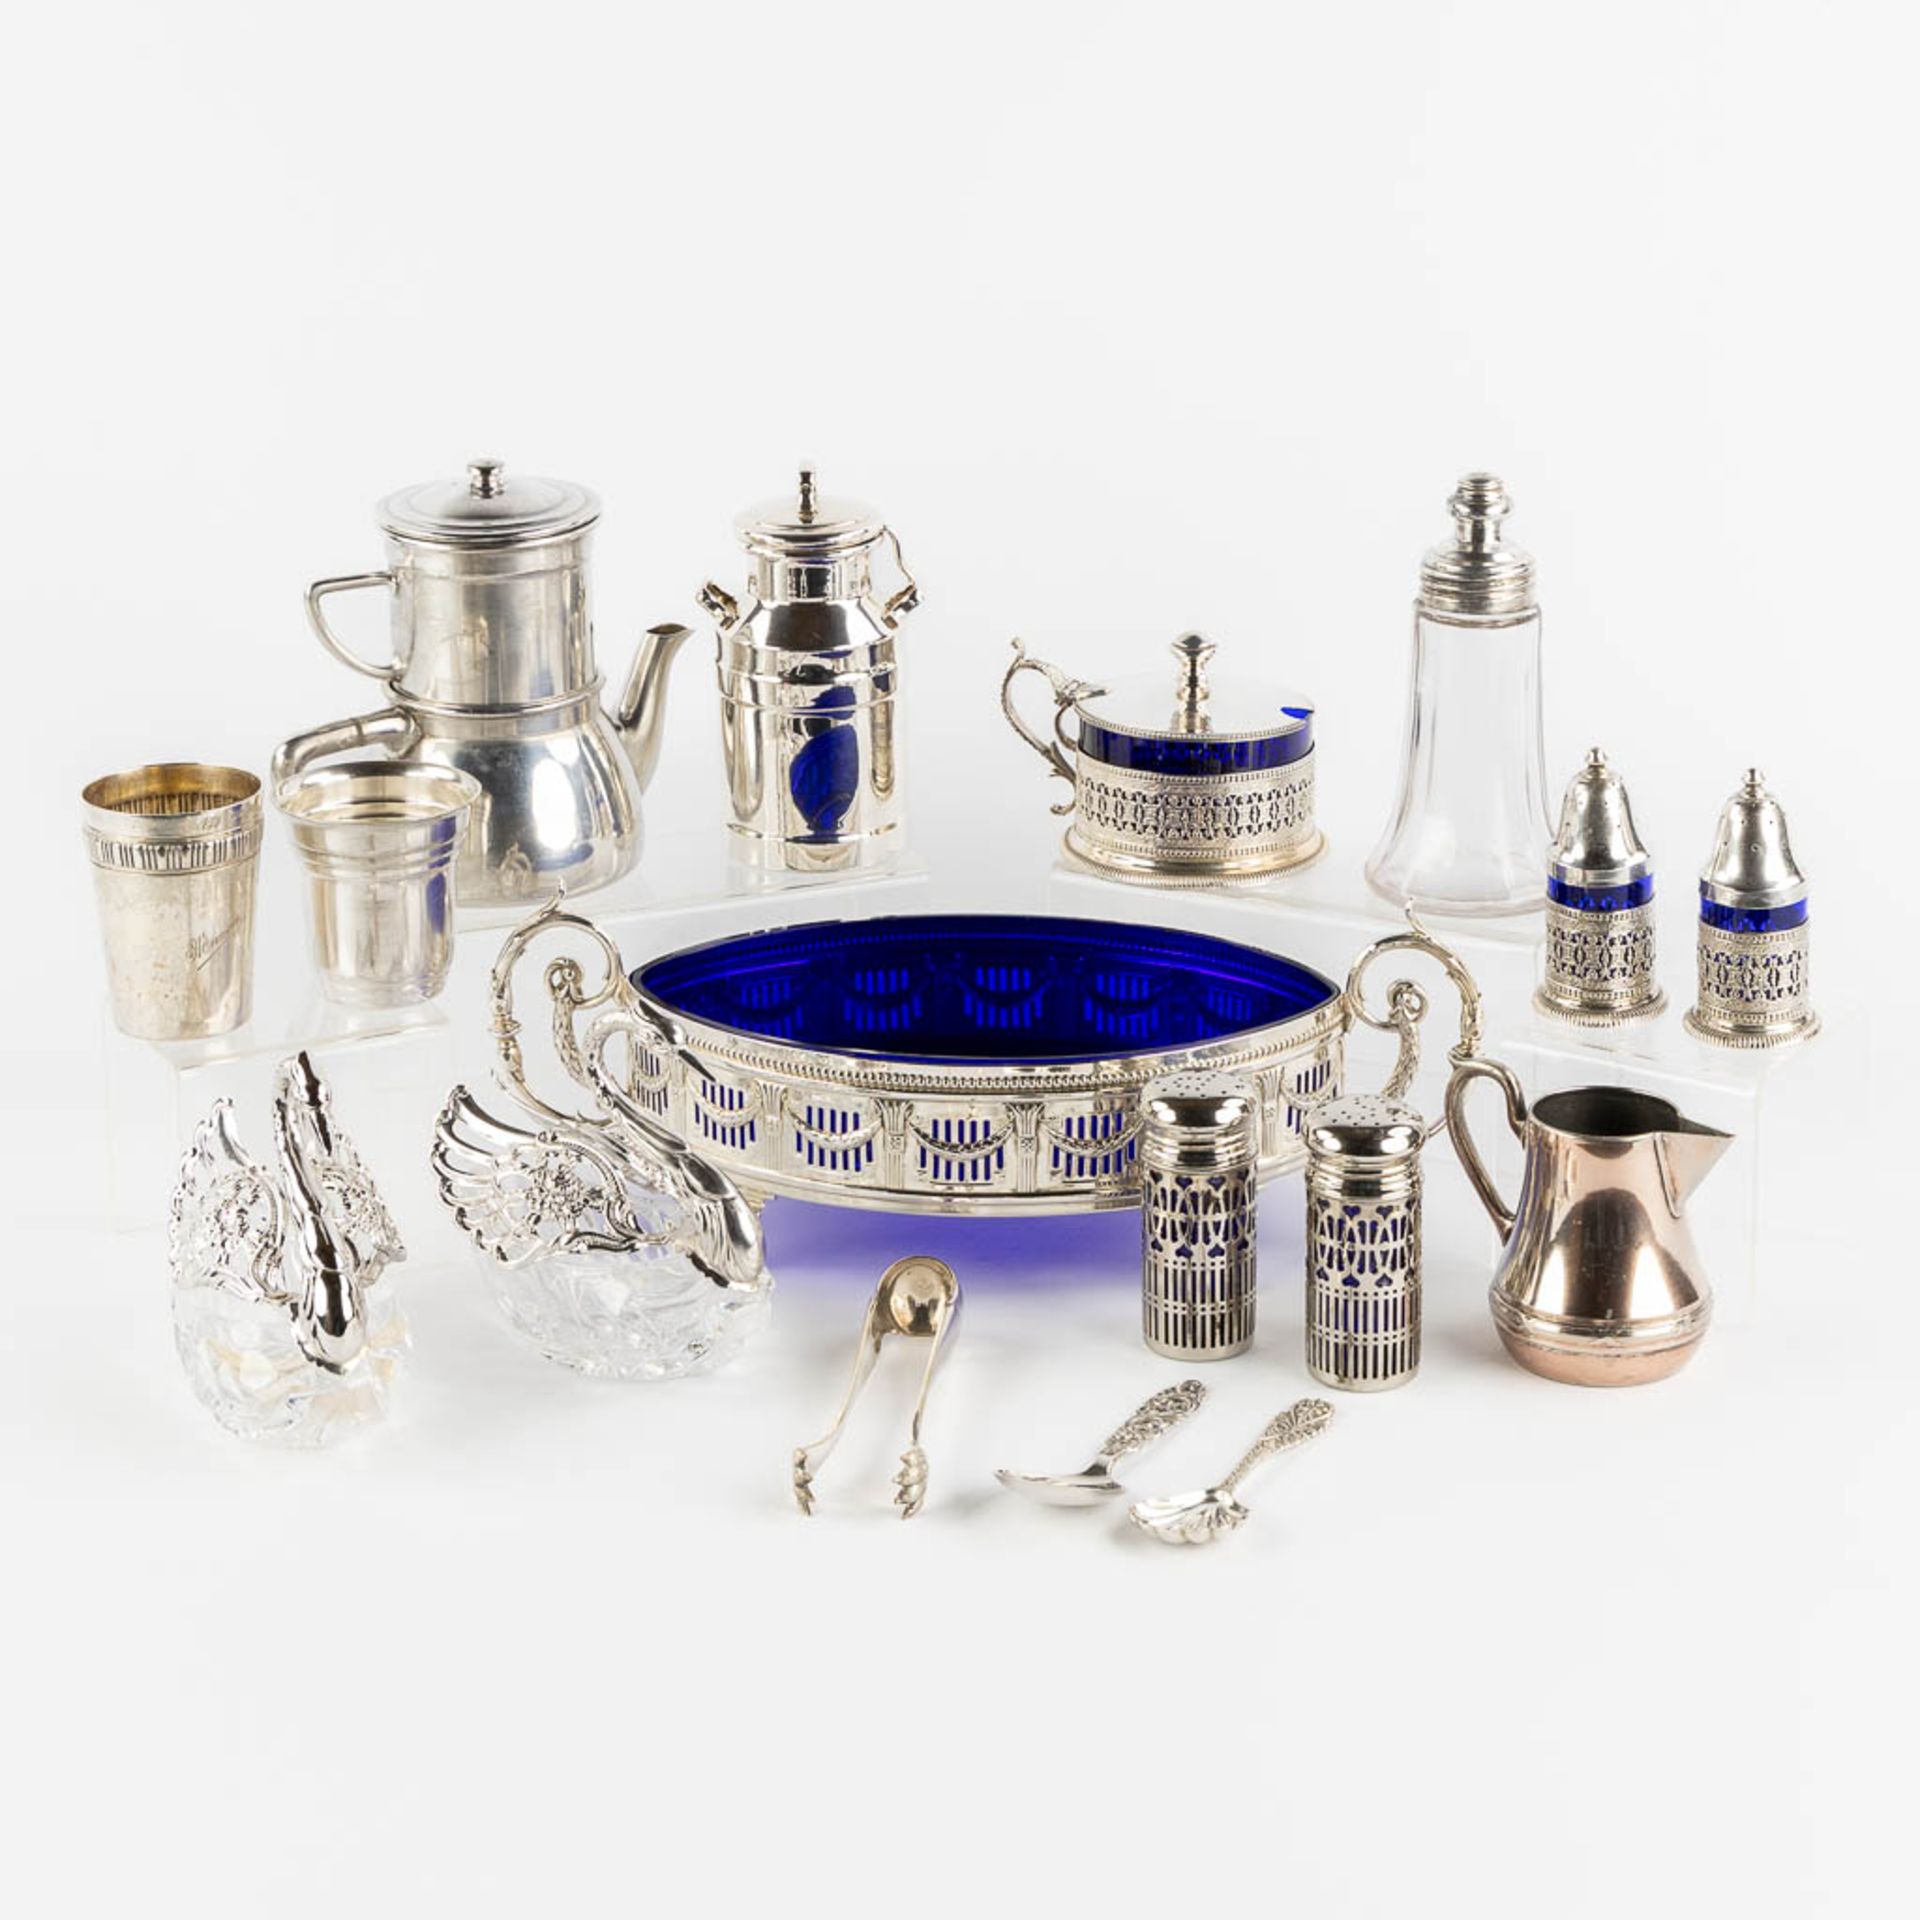 A large collection of silver and silver-plated objects, table accessories and serving ware. (L:16 x 